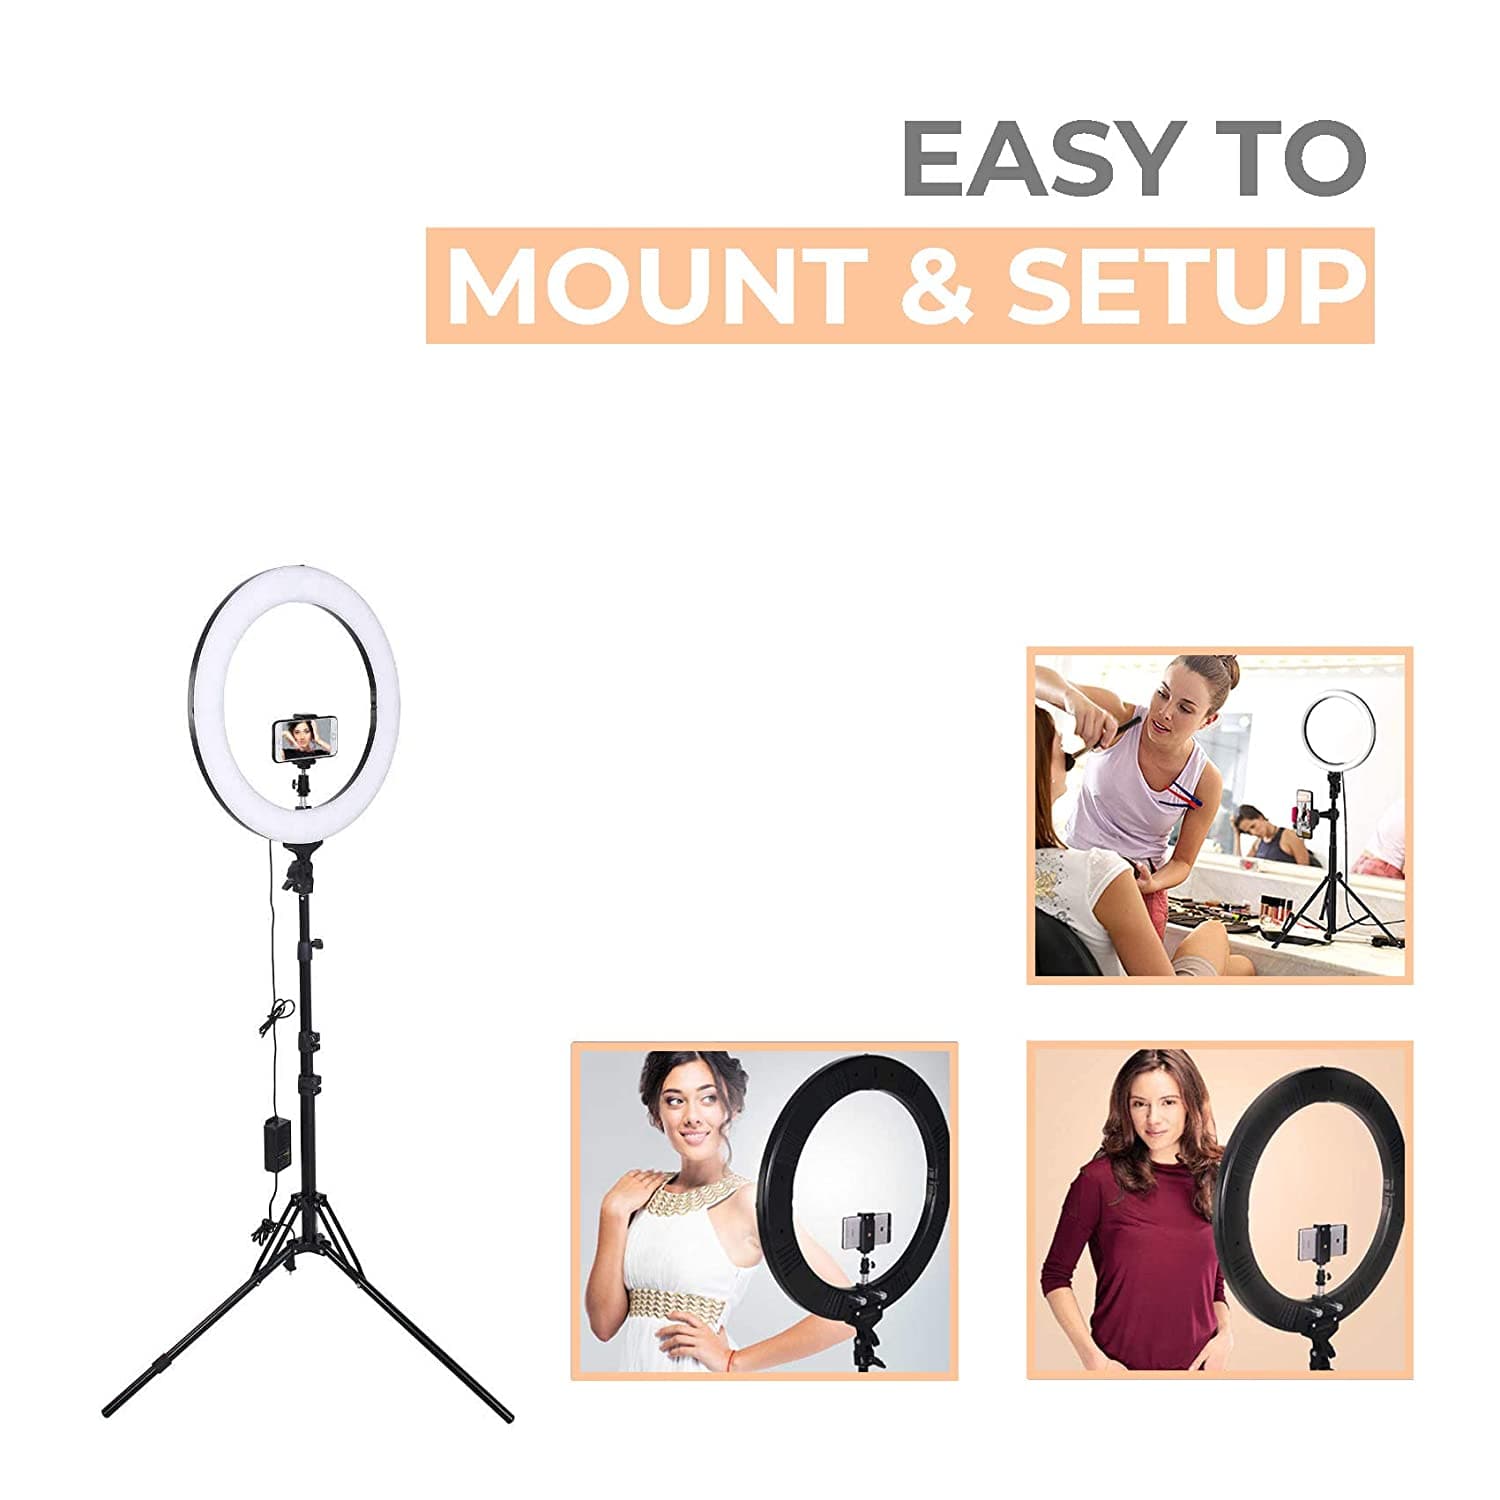 Portable LED Ring Light with 3 Color Modes Dimmable Lighting Compatible with iPhone/Android Phones and Cameras